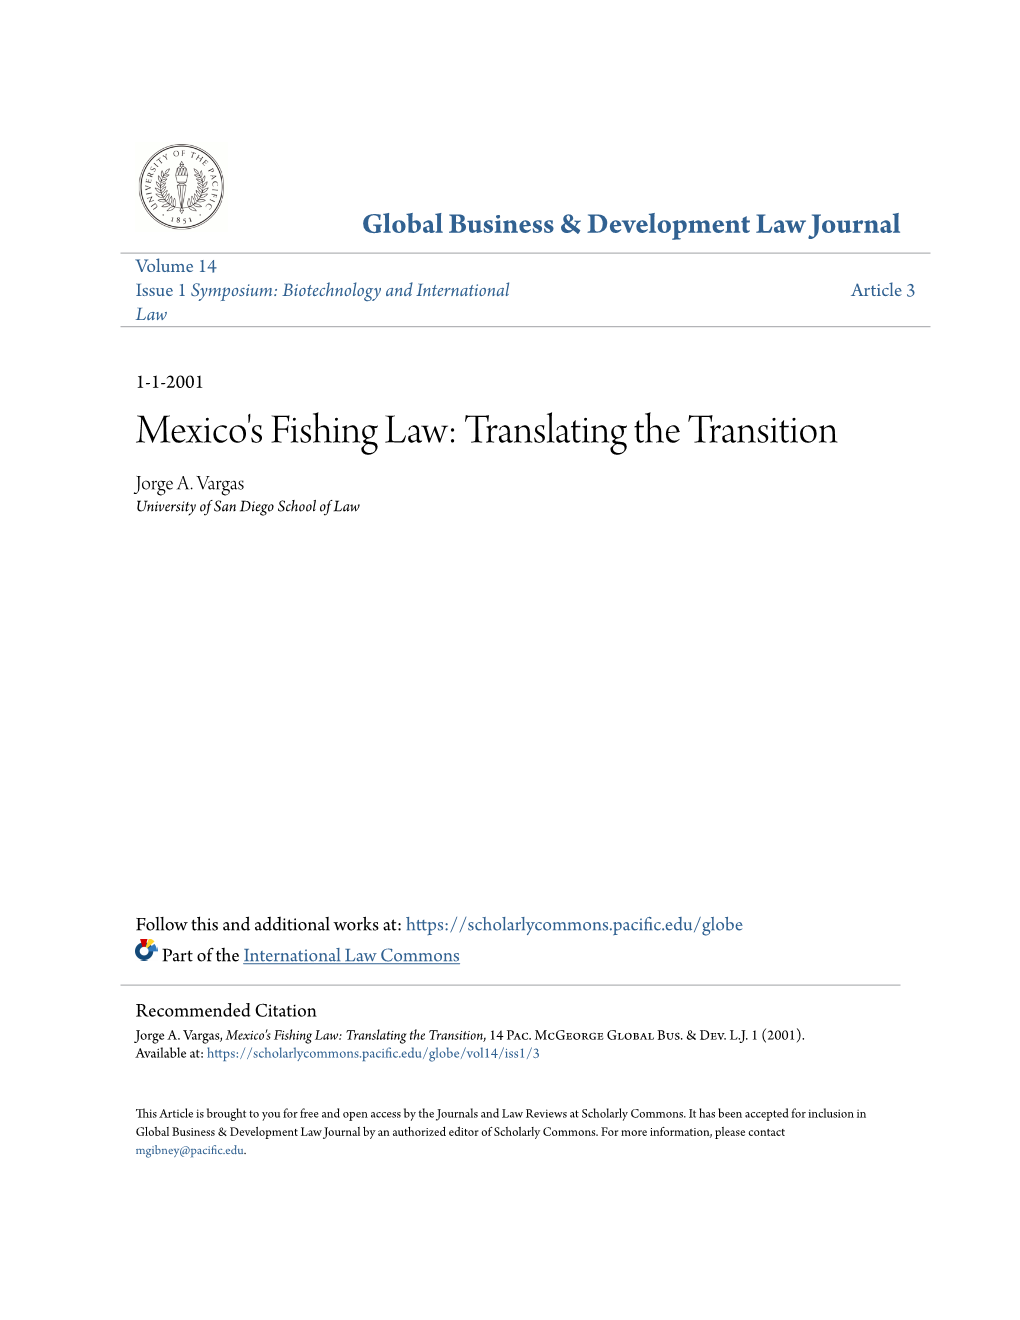 Mexico's Fishing Law: Translating the Transition Jorge A